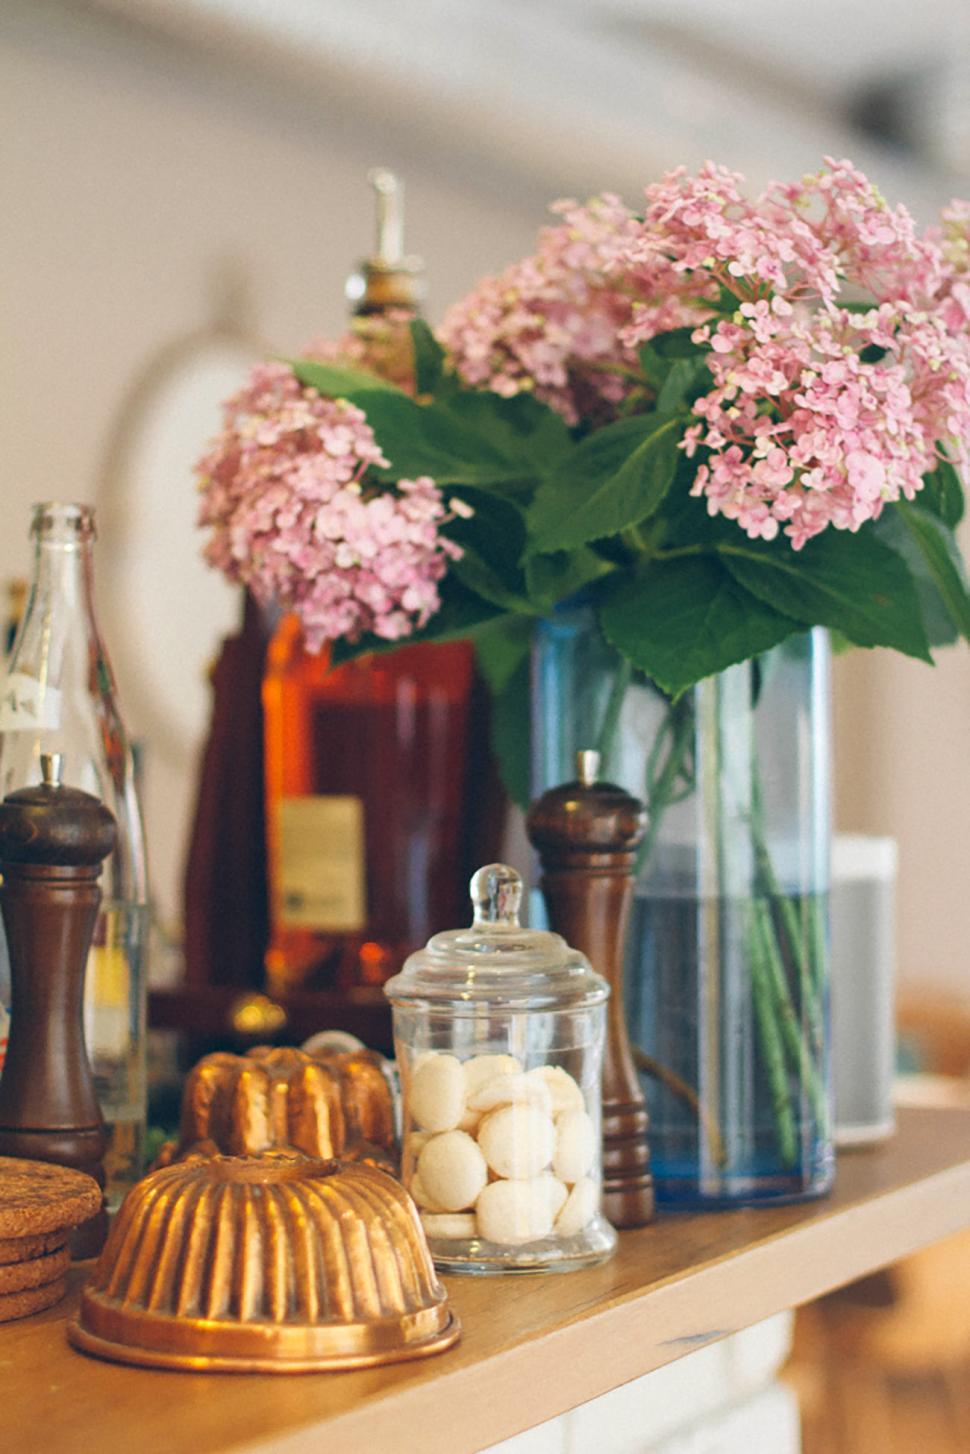 Free Image of Table Topped With Vase of Pink Flowers 